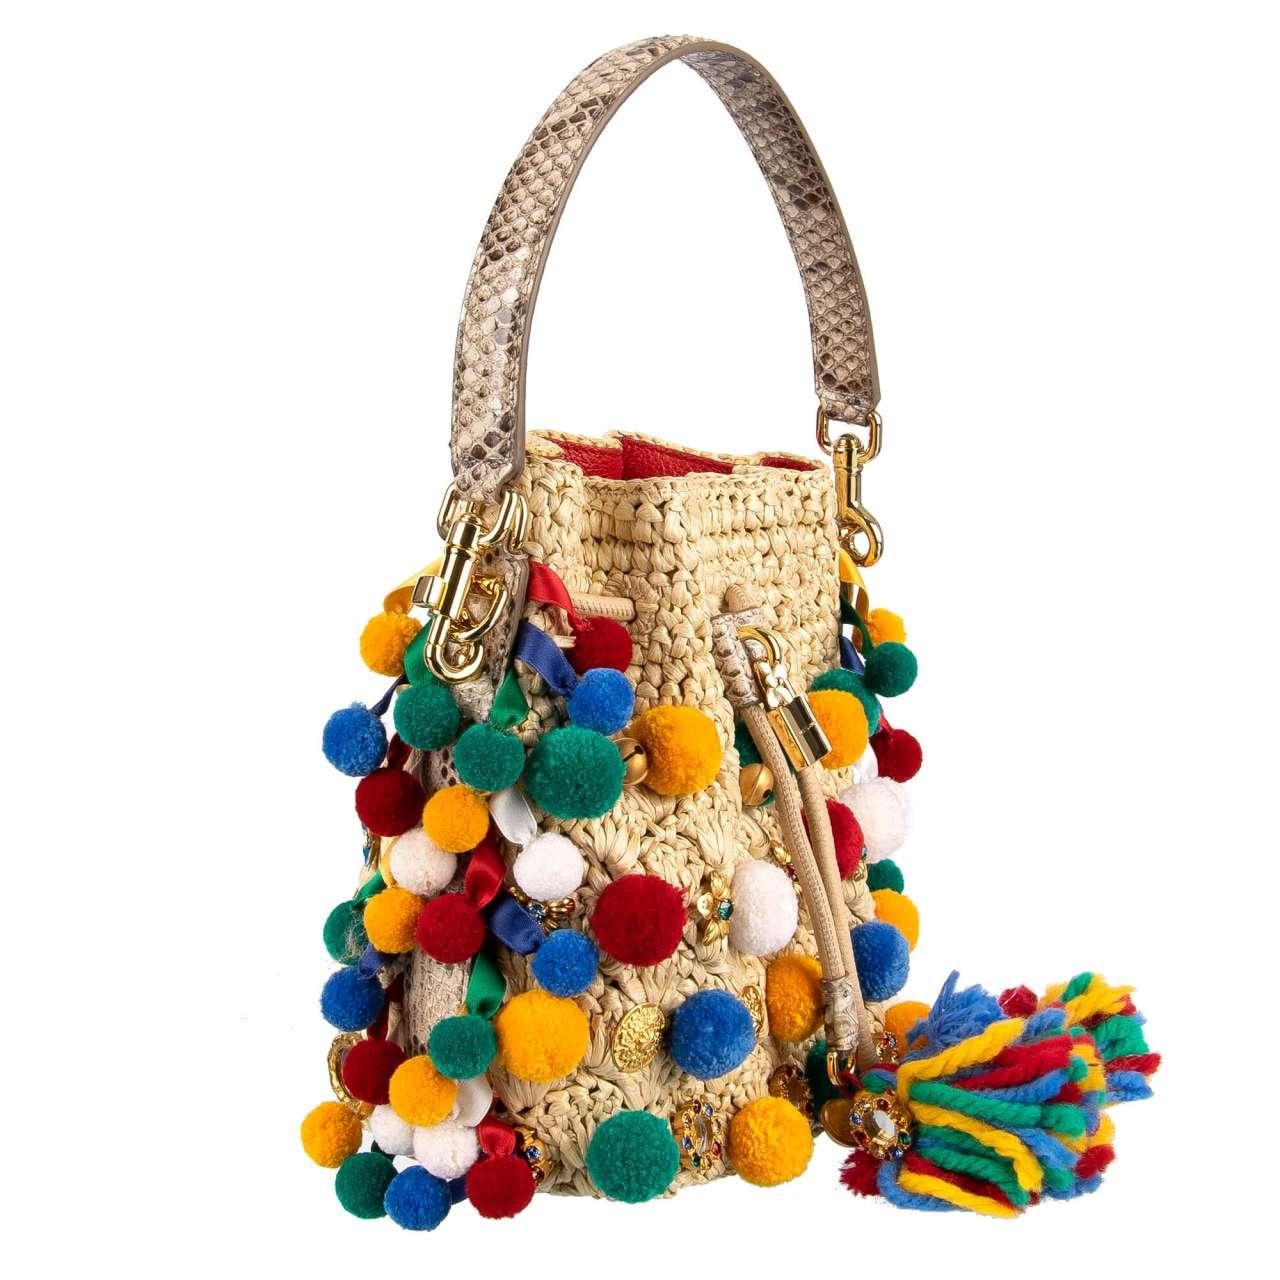 - Sicily Style straw and snakeskin bucket hobo bag / shoulder bag CLAUDIA embellished with pompoms, sing-song bells, crystals and enamel flowers by DOLCE & GABBANA - New with Tag, Dustbag, Authenticity Card - Former RRP: EUR 2.950 - Removable